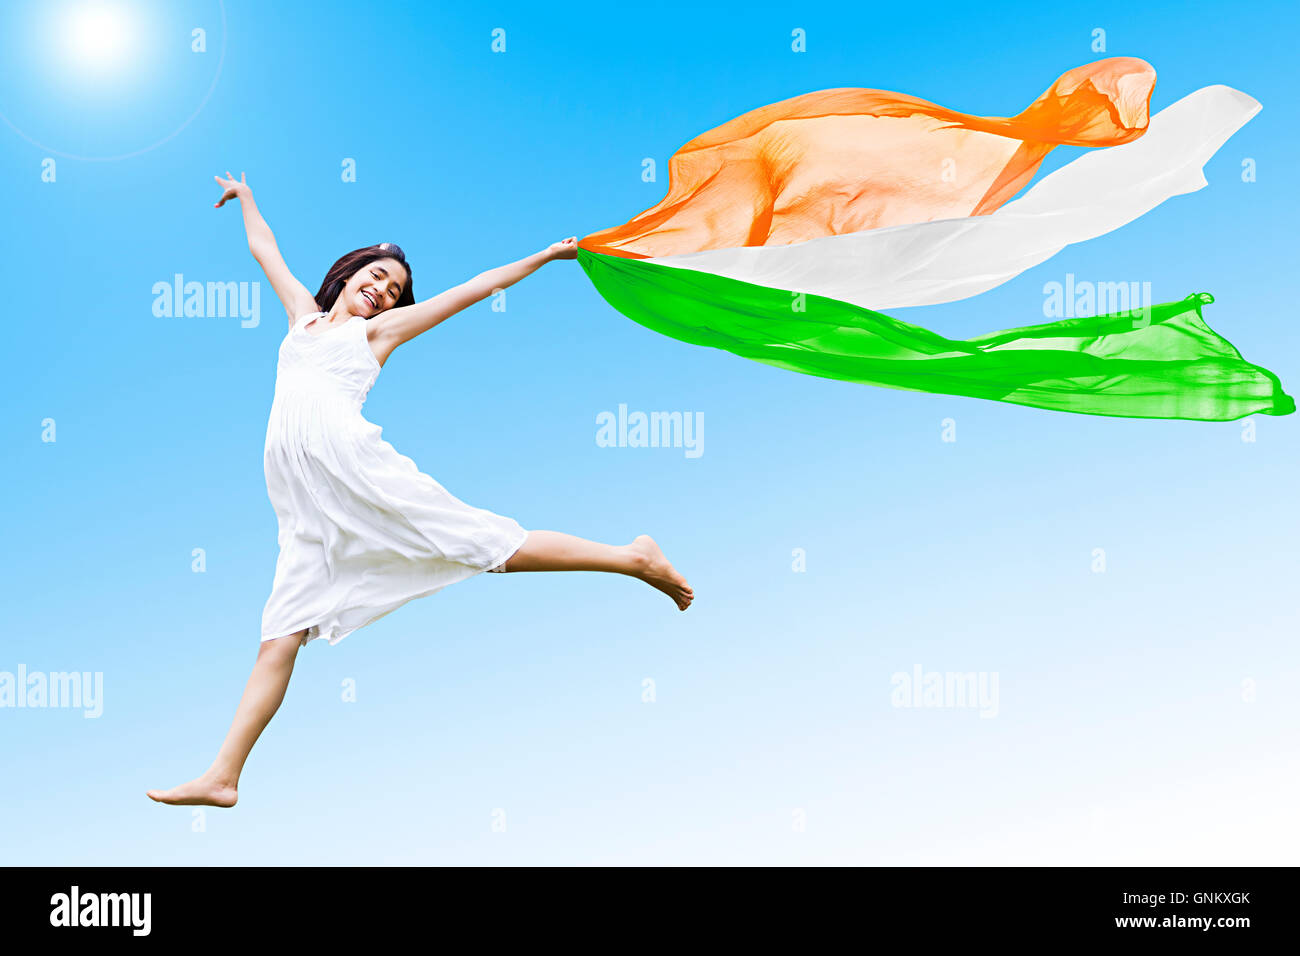 1 indian Teenagers Girl Independence Day Jumping holding Dupatta Fluttering Stock Photo